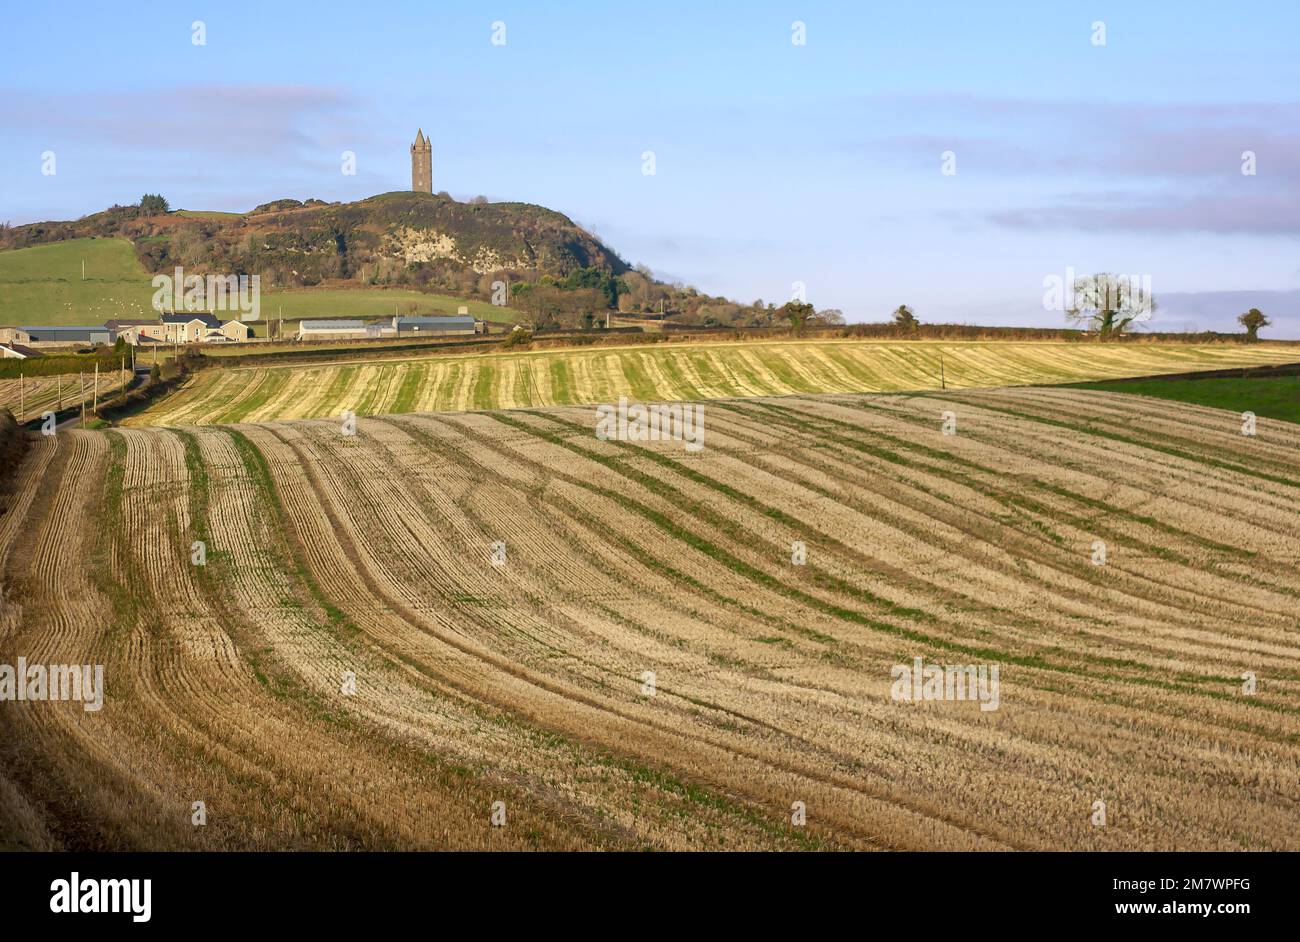 Scrabo Tower on Scrabo Hill overlooking harvested farm fields on the Comber Road outside Newtownards in County Down Northern Ireland Stock Photo